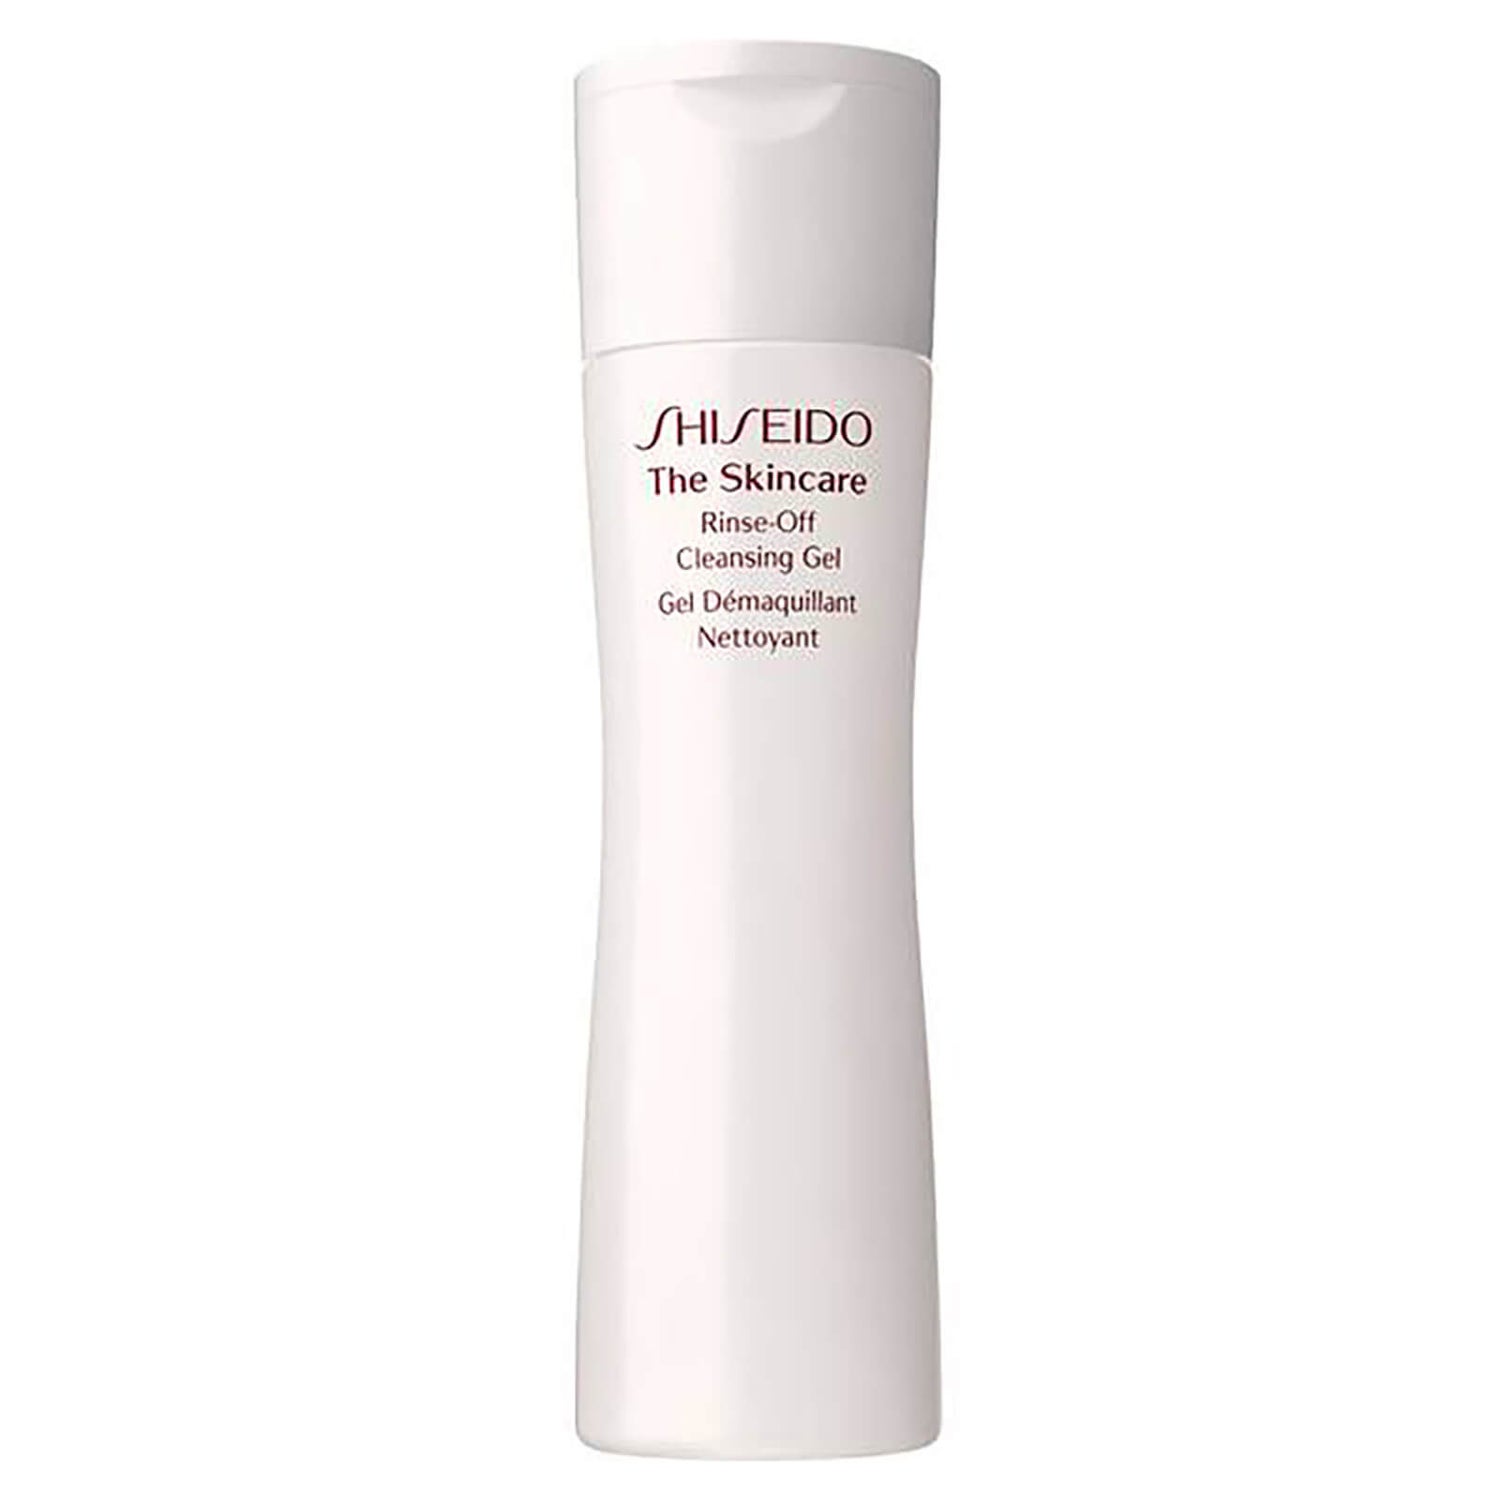 Shiseido The Skincare Essentials Rinse-Off Cleansing Gel (200 ml)